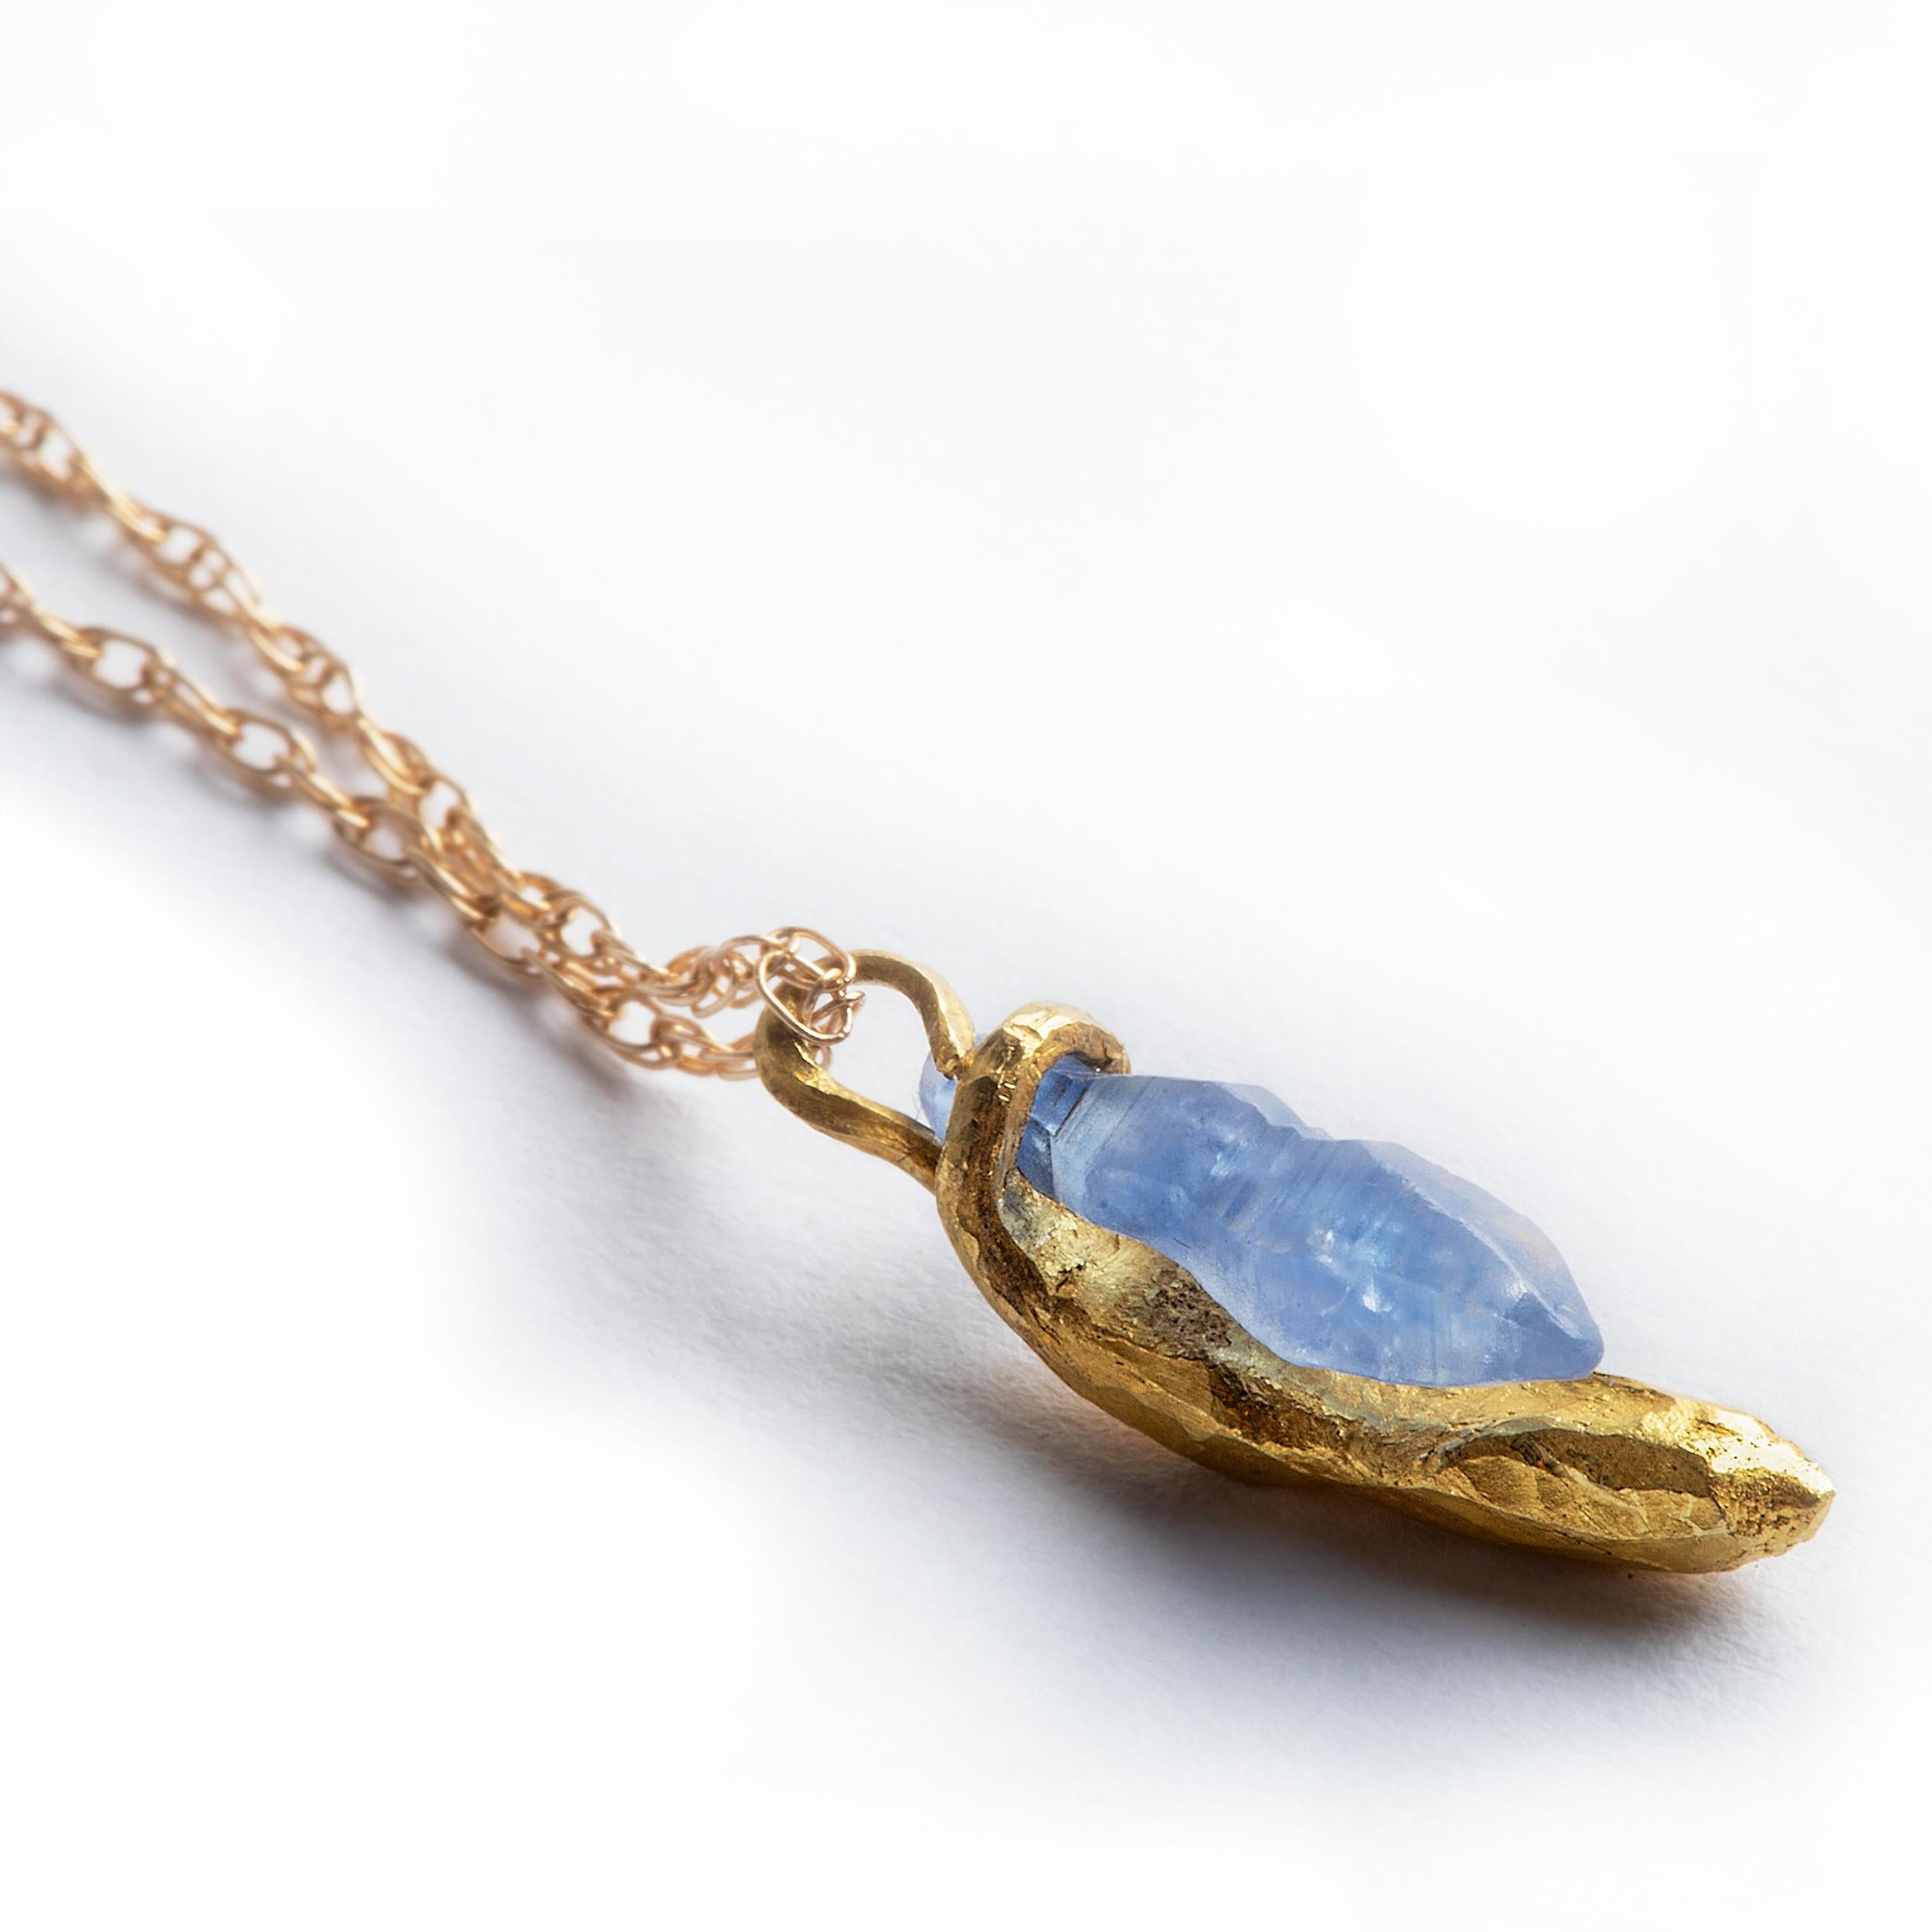 This delicate pendant necklace connects a beautifully formed 1.05ct rough sapphire crystal and a 22k yellow gold miniature sculpture forged to embrace and wrap around the stone.

The embrace hangs lightly from an airy 16-inch 18k gold rope